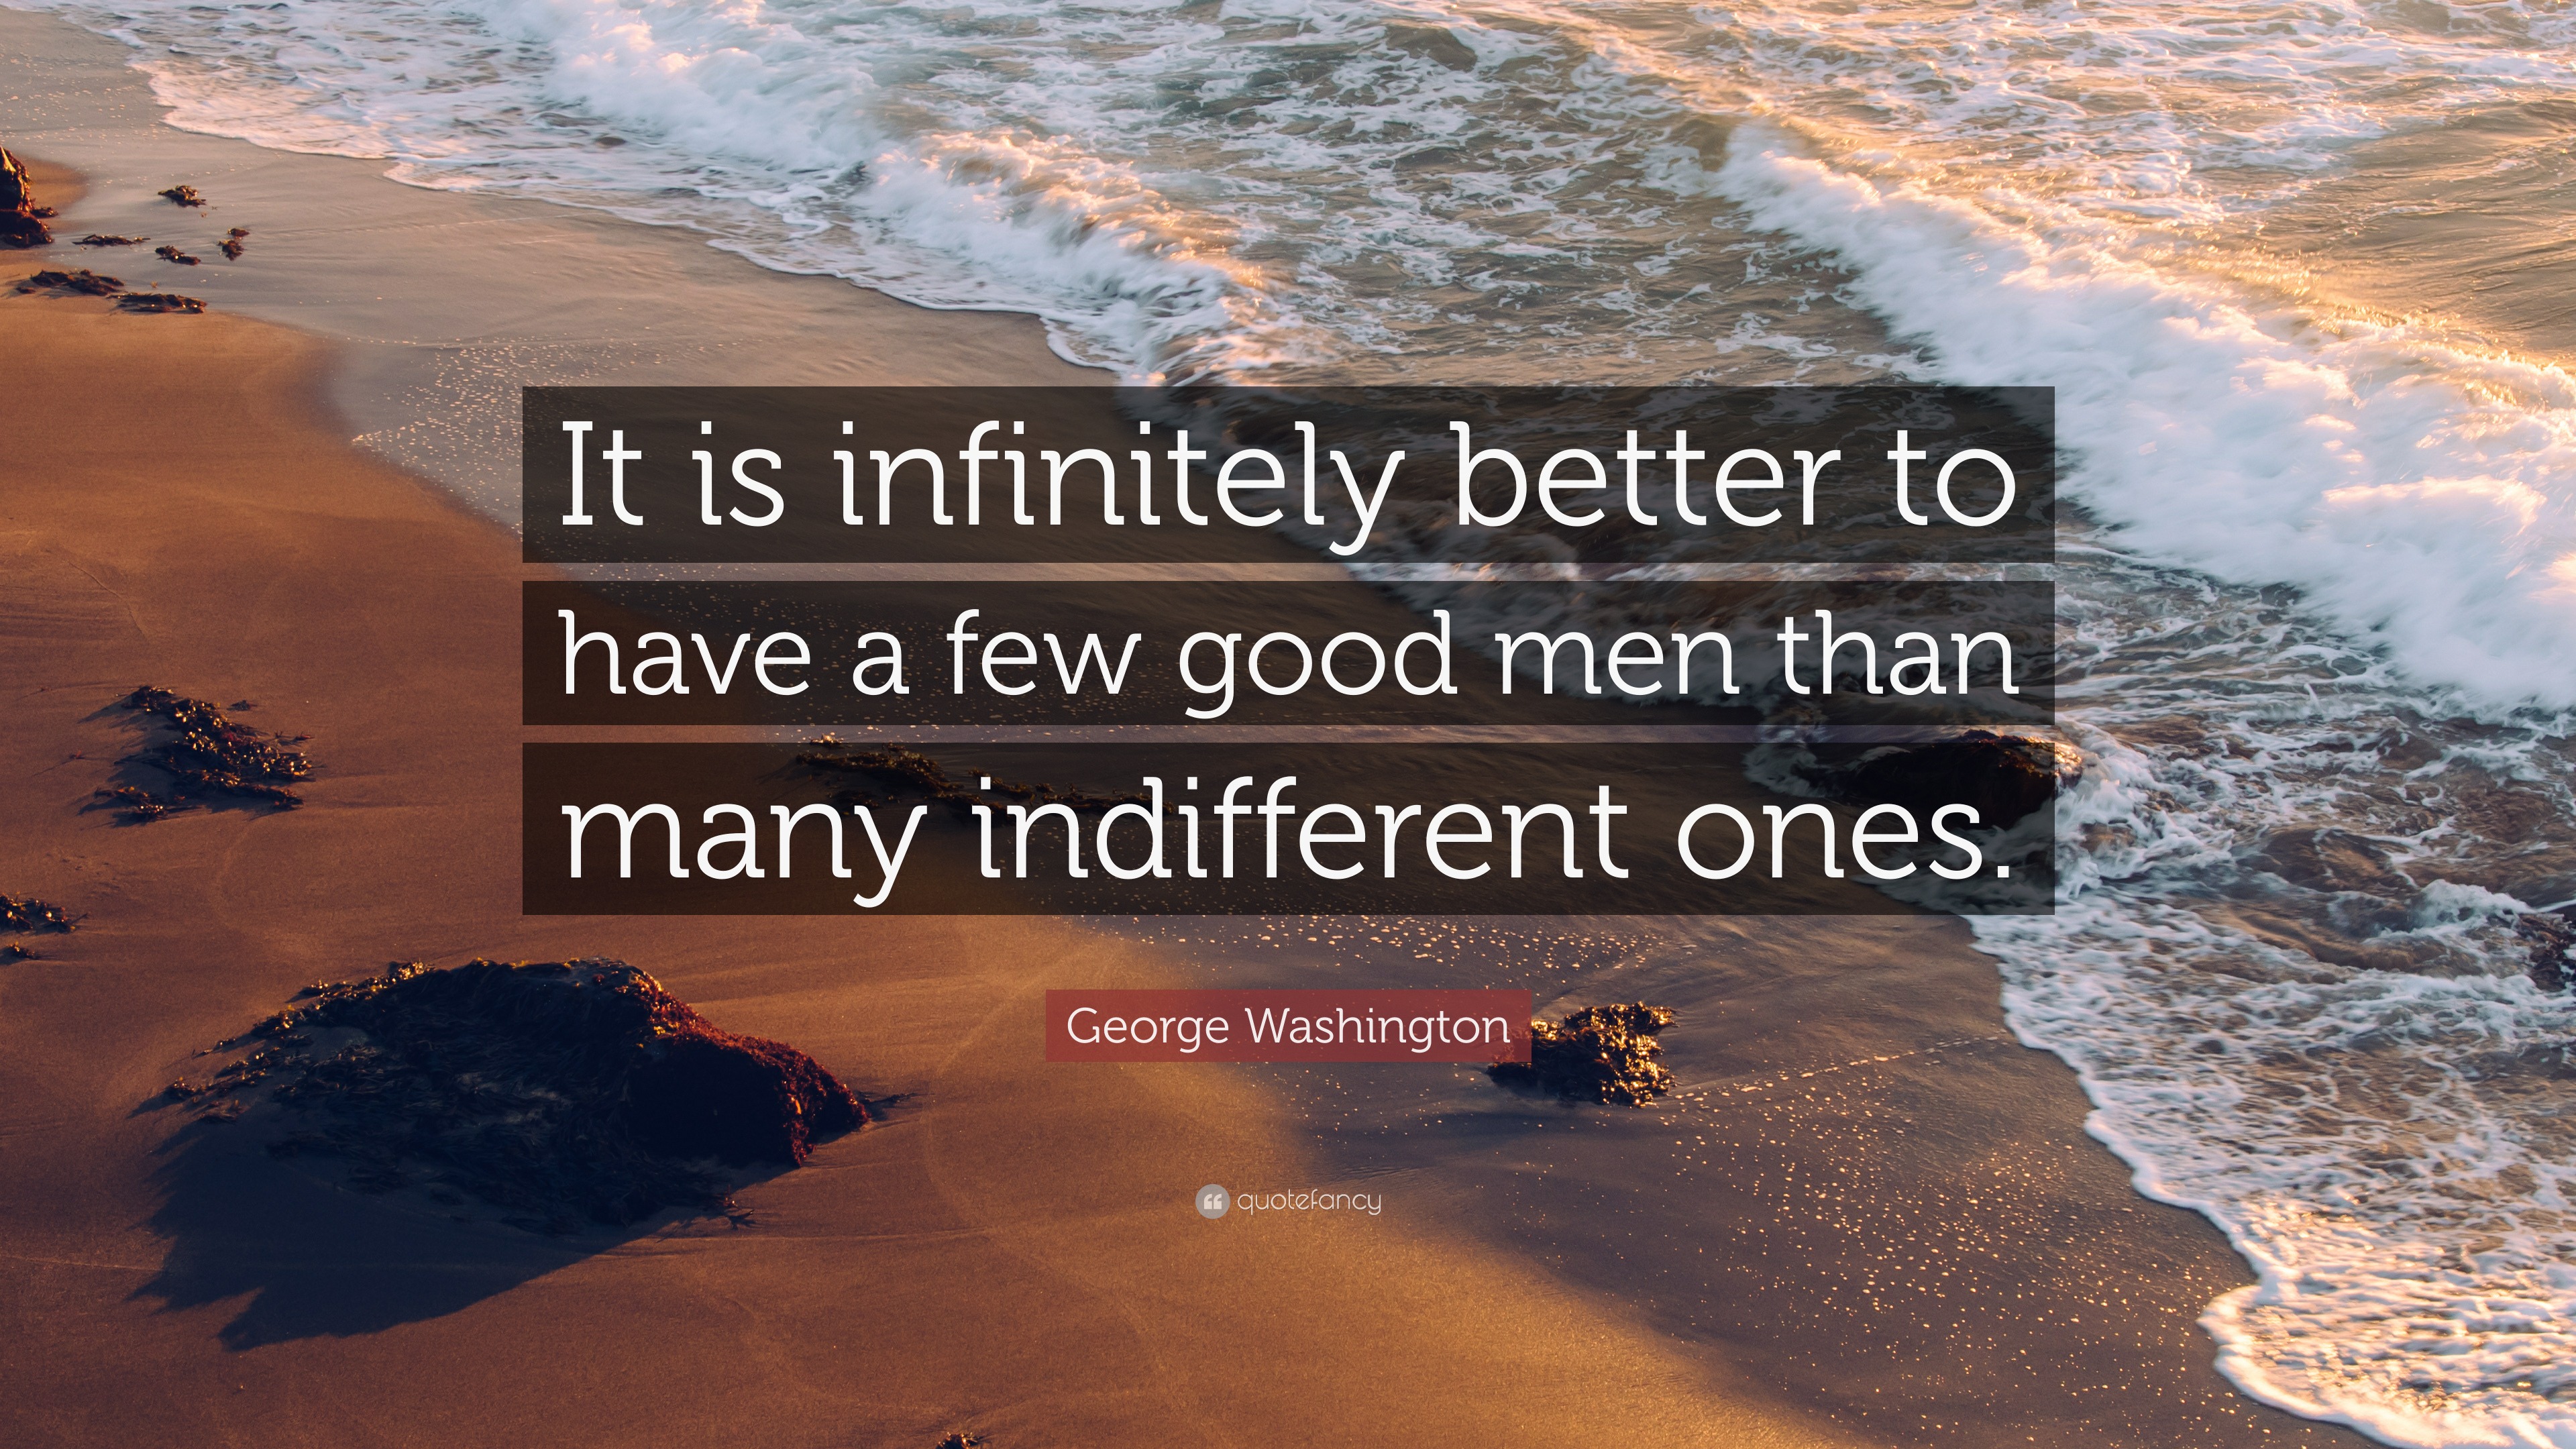 This is how to be a good man, according to a few good men